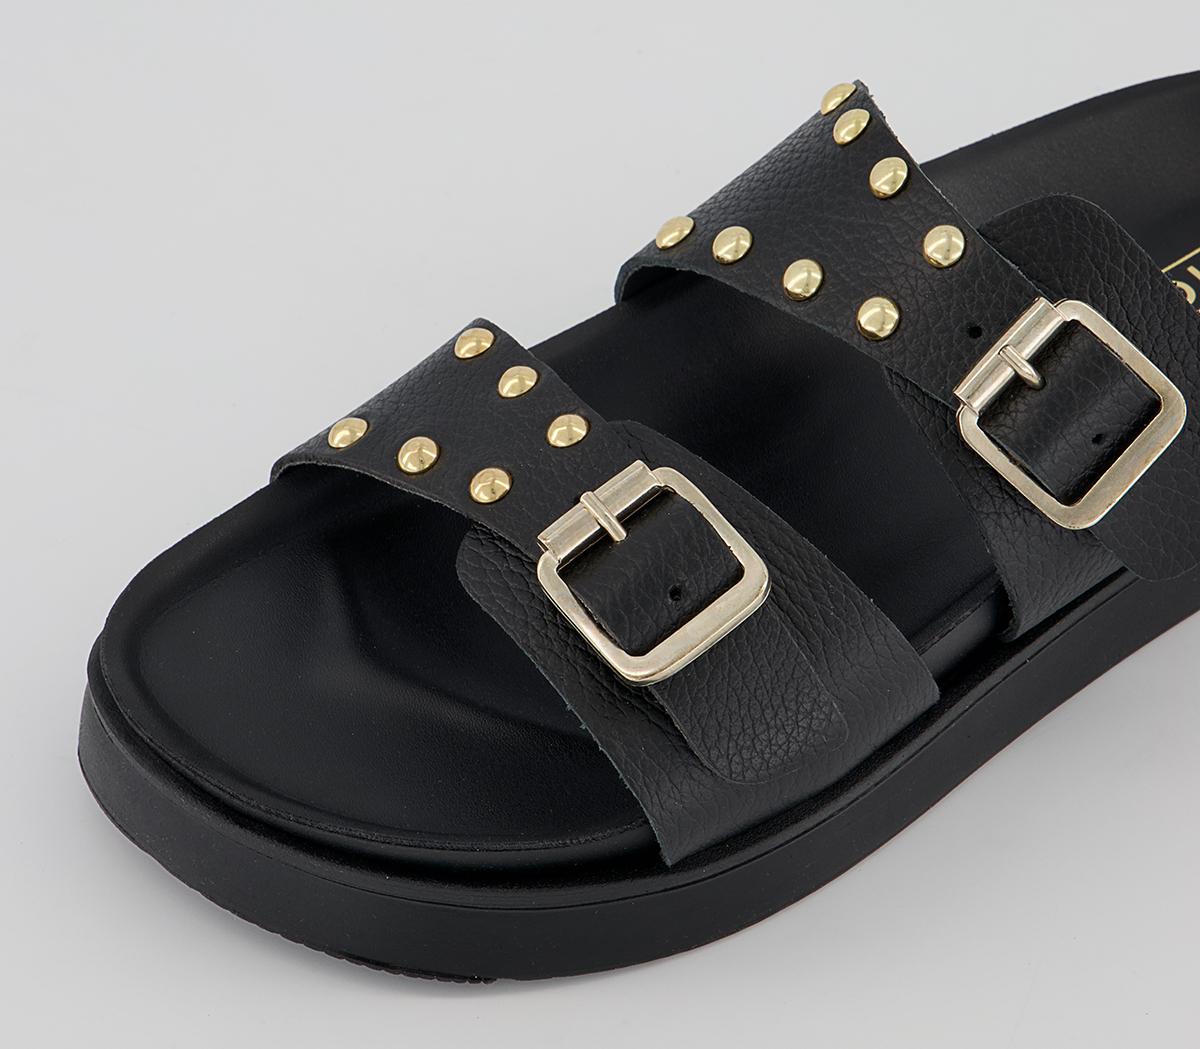 OFFICE Sending Studded Cleated Buckle Sandals Black - Platform & Chunky ...